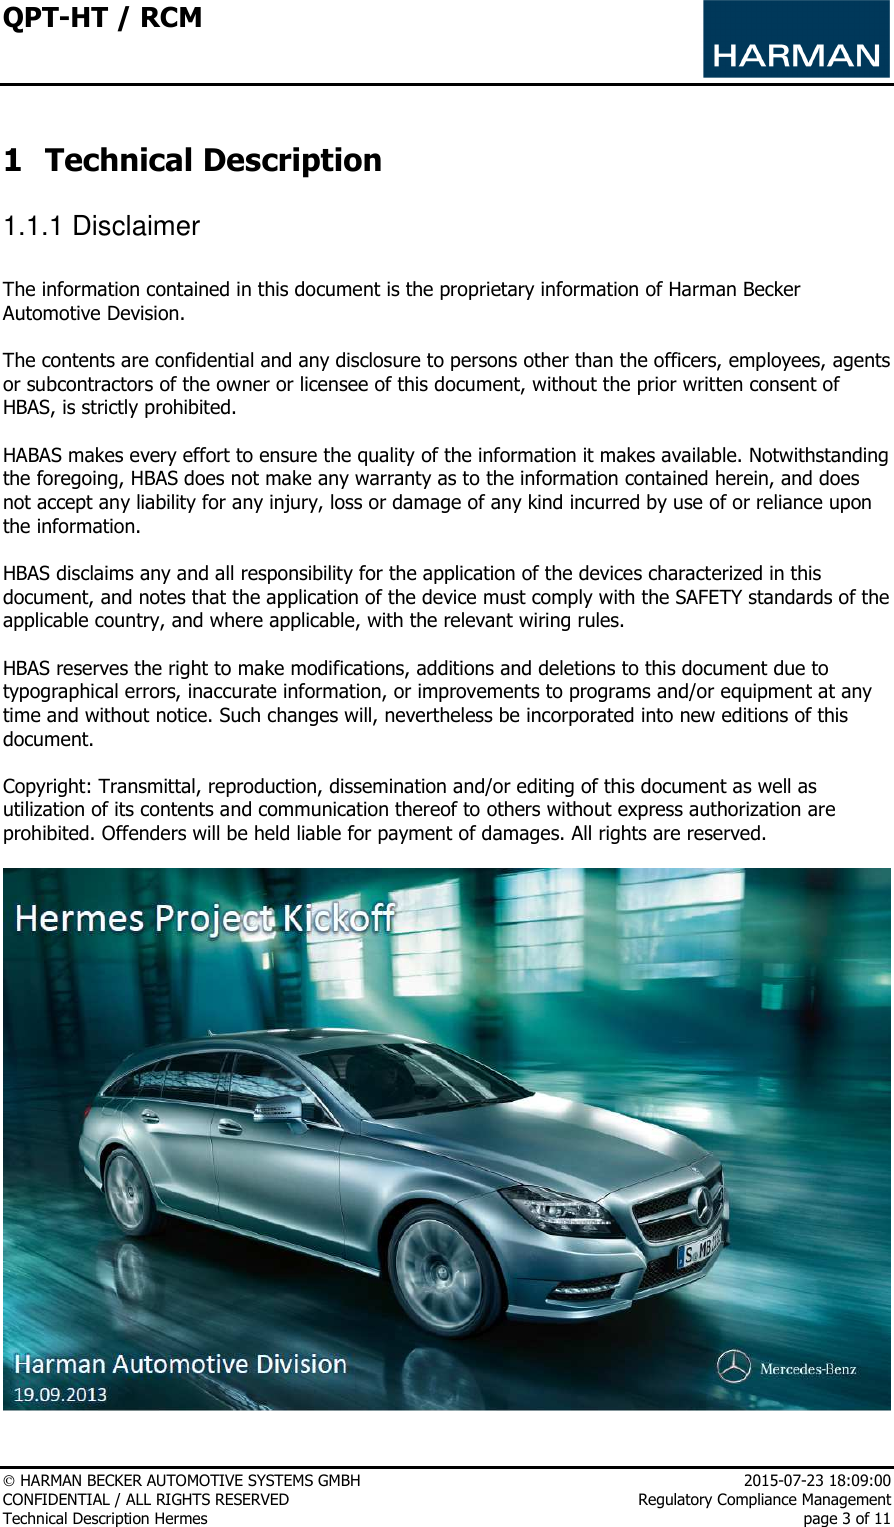 QPT-HT / RCM      HARMAN BECKER AUTOMOTIVE SYSTEMS GMBH    2015-07-23 18:09:00 CONFIDENTIAL / ALL RIGHTS RESERVED     Regulatory Compliance Management Technical Description Hermes    page 3 of 11  1 Technical Description 1.1.1 Disclaimer   The information contained in this document is the proprietary information of Harman Becker Automotive Devision.  The contents are confidential and any disclosure to persons other than the officers, employees, agents or subcontractors of the owner or licensee of this document, without the prior written consent of HBAS, is strictly prohibited.  HABAS makes every effort to ensure the quality of the information it makes available. Notwithstanding the foregoing, HBAS does not make any warranty as to the information contained herein, and does not accept any liability for any injury, loss or damage of any kind incurred by use of or reliance upon the information.  HBAS disclaims any and all responsibility for the application of the devices characterized in this document, and notes that the application of the device must comply with the SAFETY standards of the applicable country, and where applicable, with the relevant wiring rules.  HBAS reserves the right to make modifications, additions and deletions to this document due to typographical errors, inaccurate information, or improvements to programs and/or equipment at any time and without notice. Such changes will, nevertheless be incorporated into new editions of this document.   Copyright: Transmittal, reproduction, dissemination and/or editing of this document as well as utilization of its contents and communication thereof to others without express authorization are prohibited. Offenders will be held liable for payment of damages. All rights are reserved.   